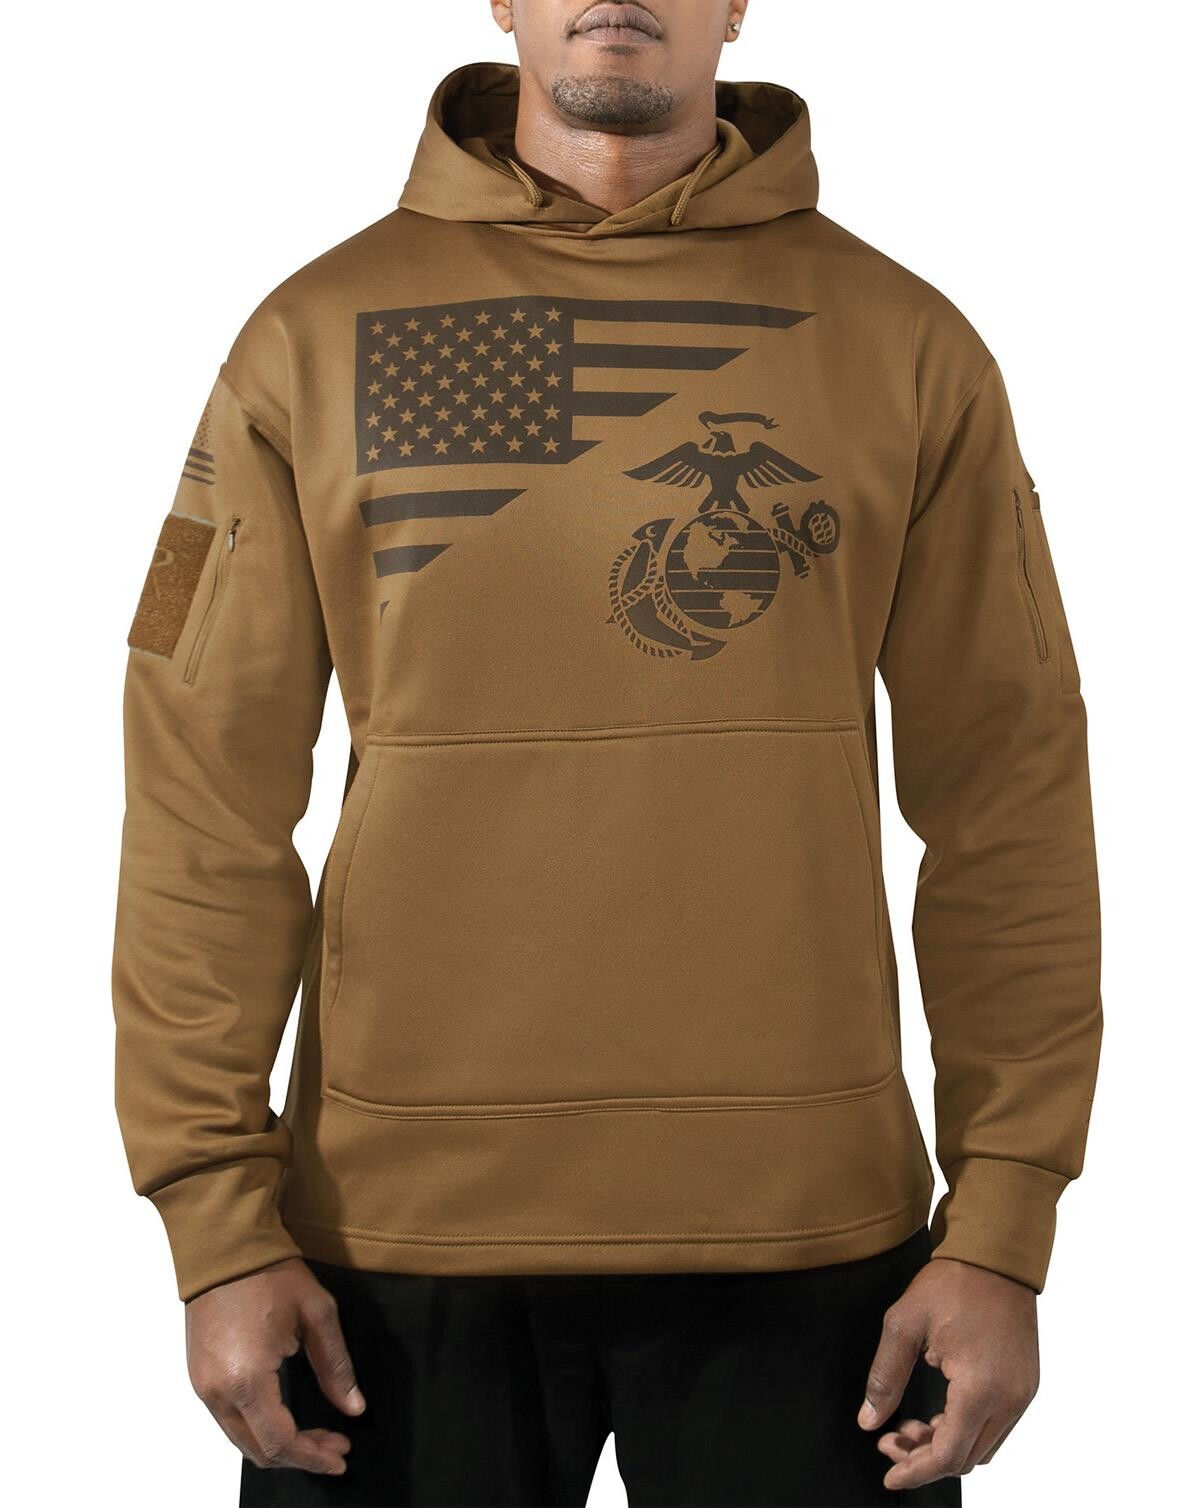 Rothco US Flag Concealed Carry Hoodie (Coyote Brun, S)